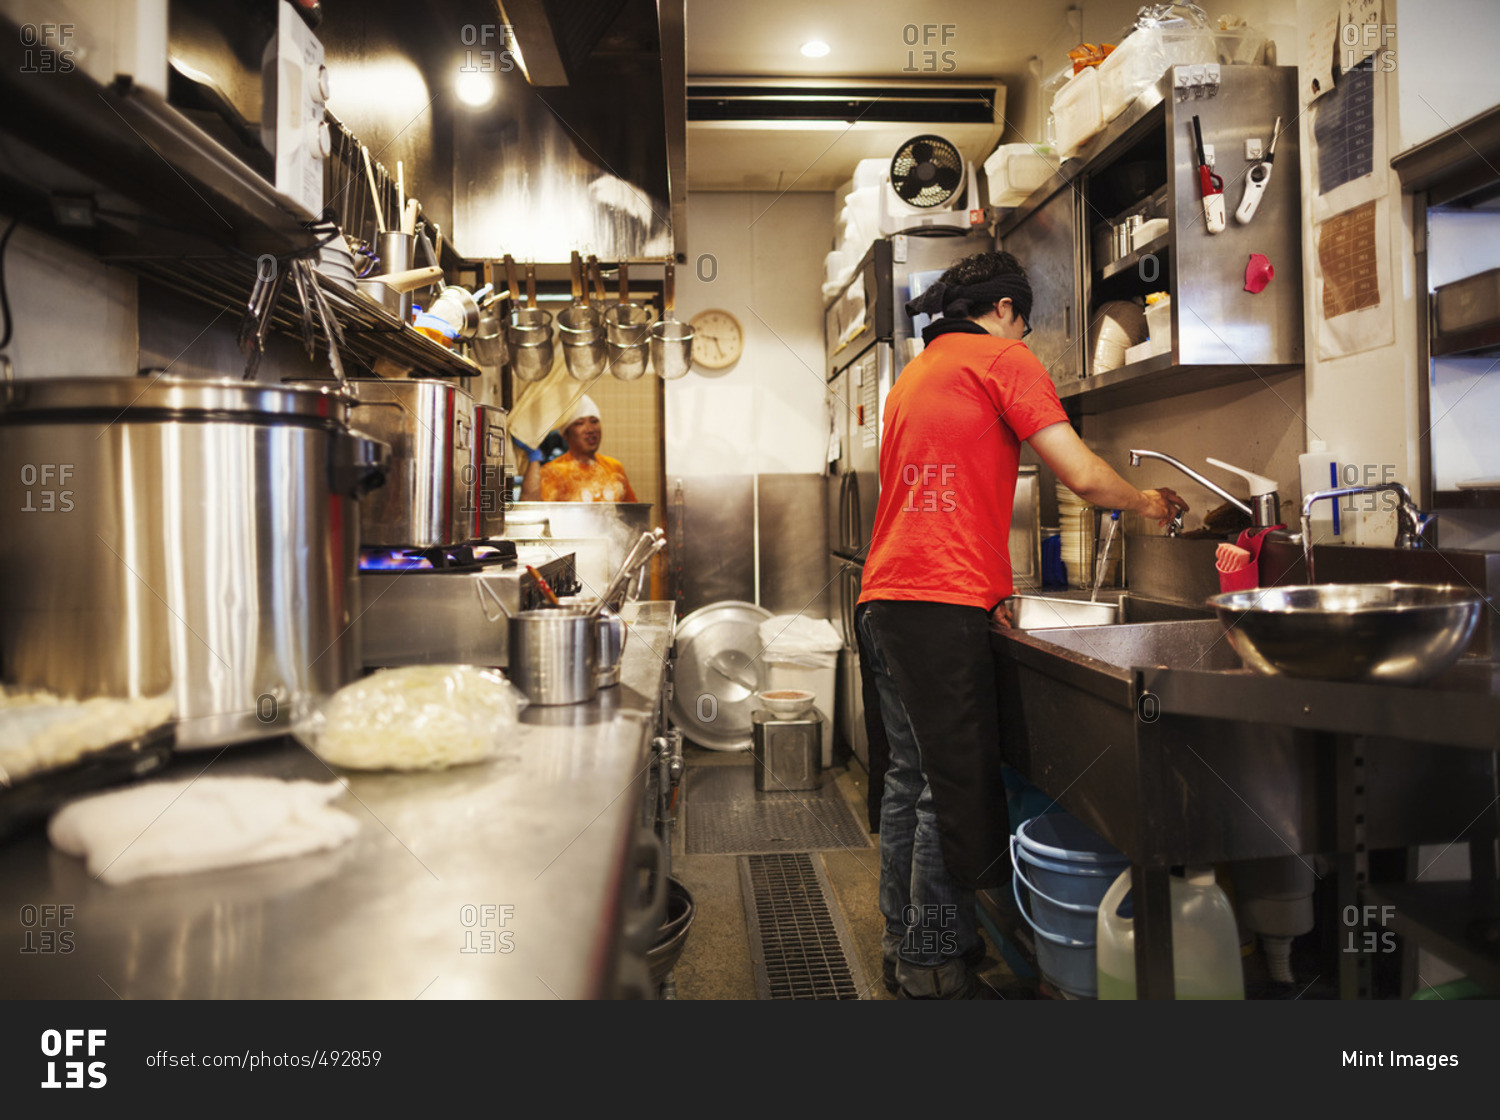 Ramen noodle shop. A chef working in a kitchen preparing food using a stove and large pans.